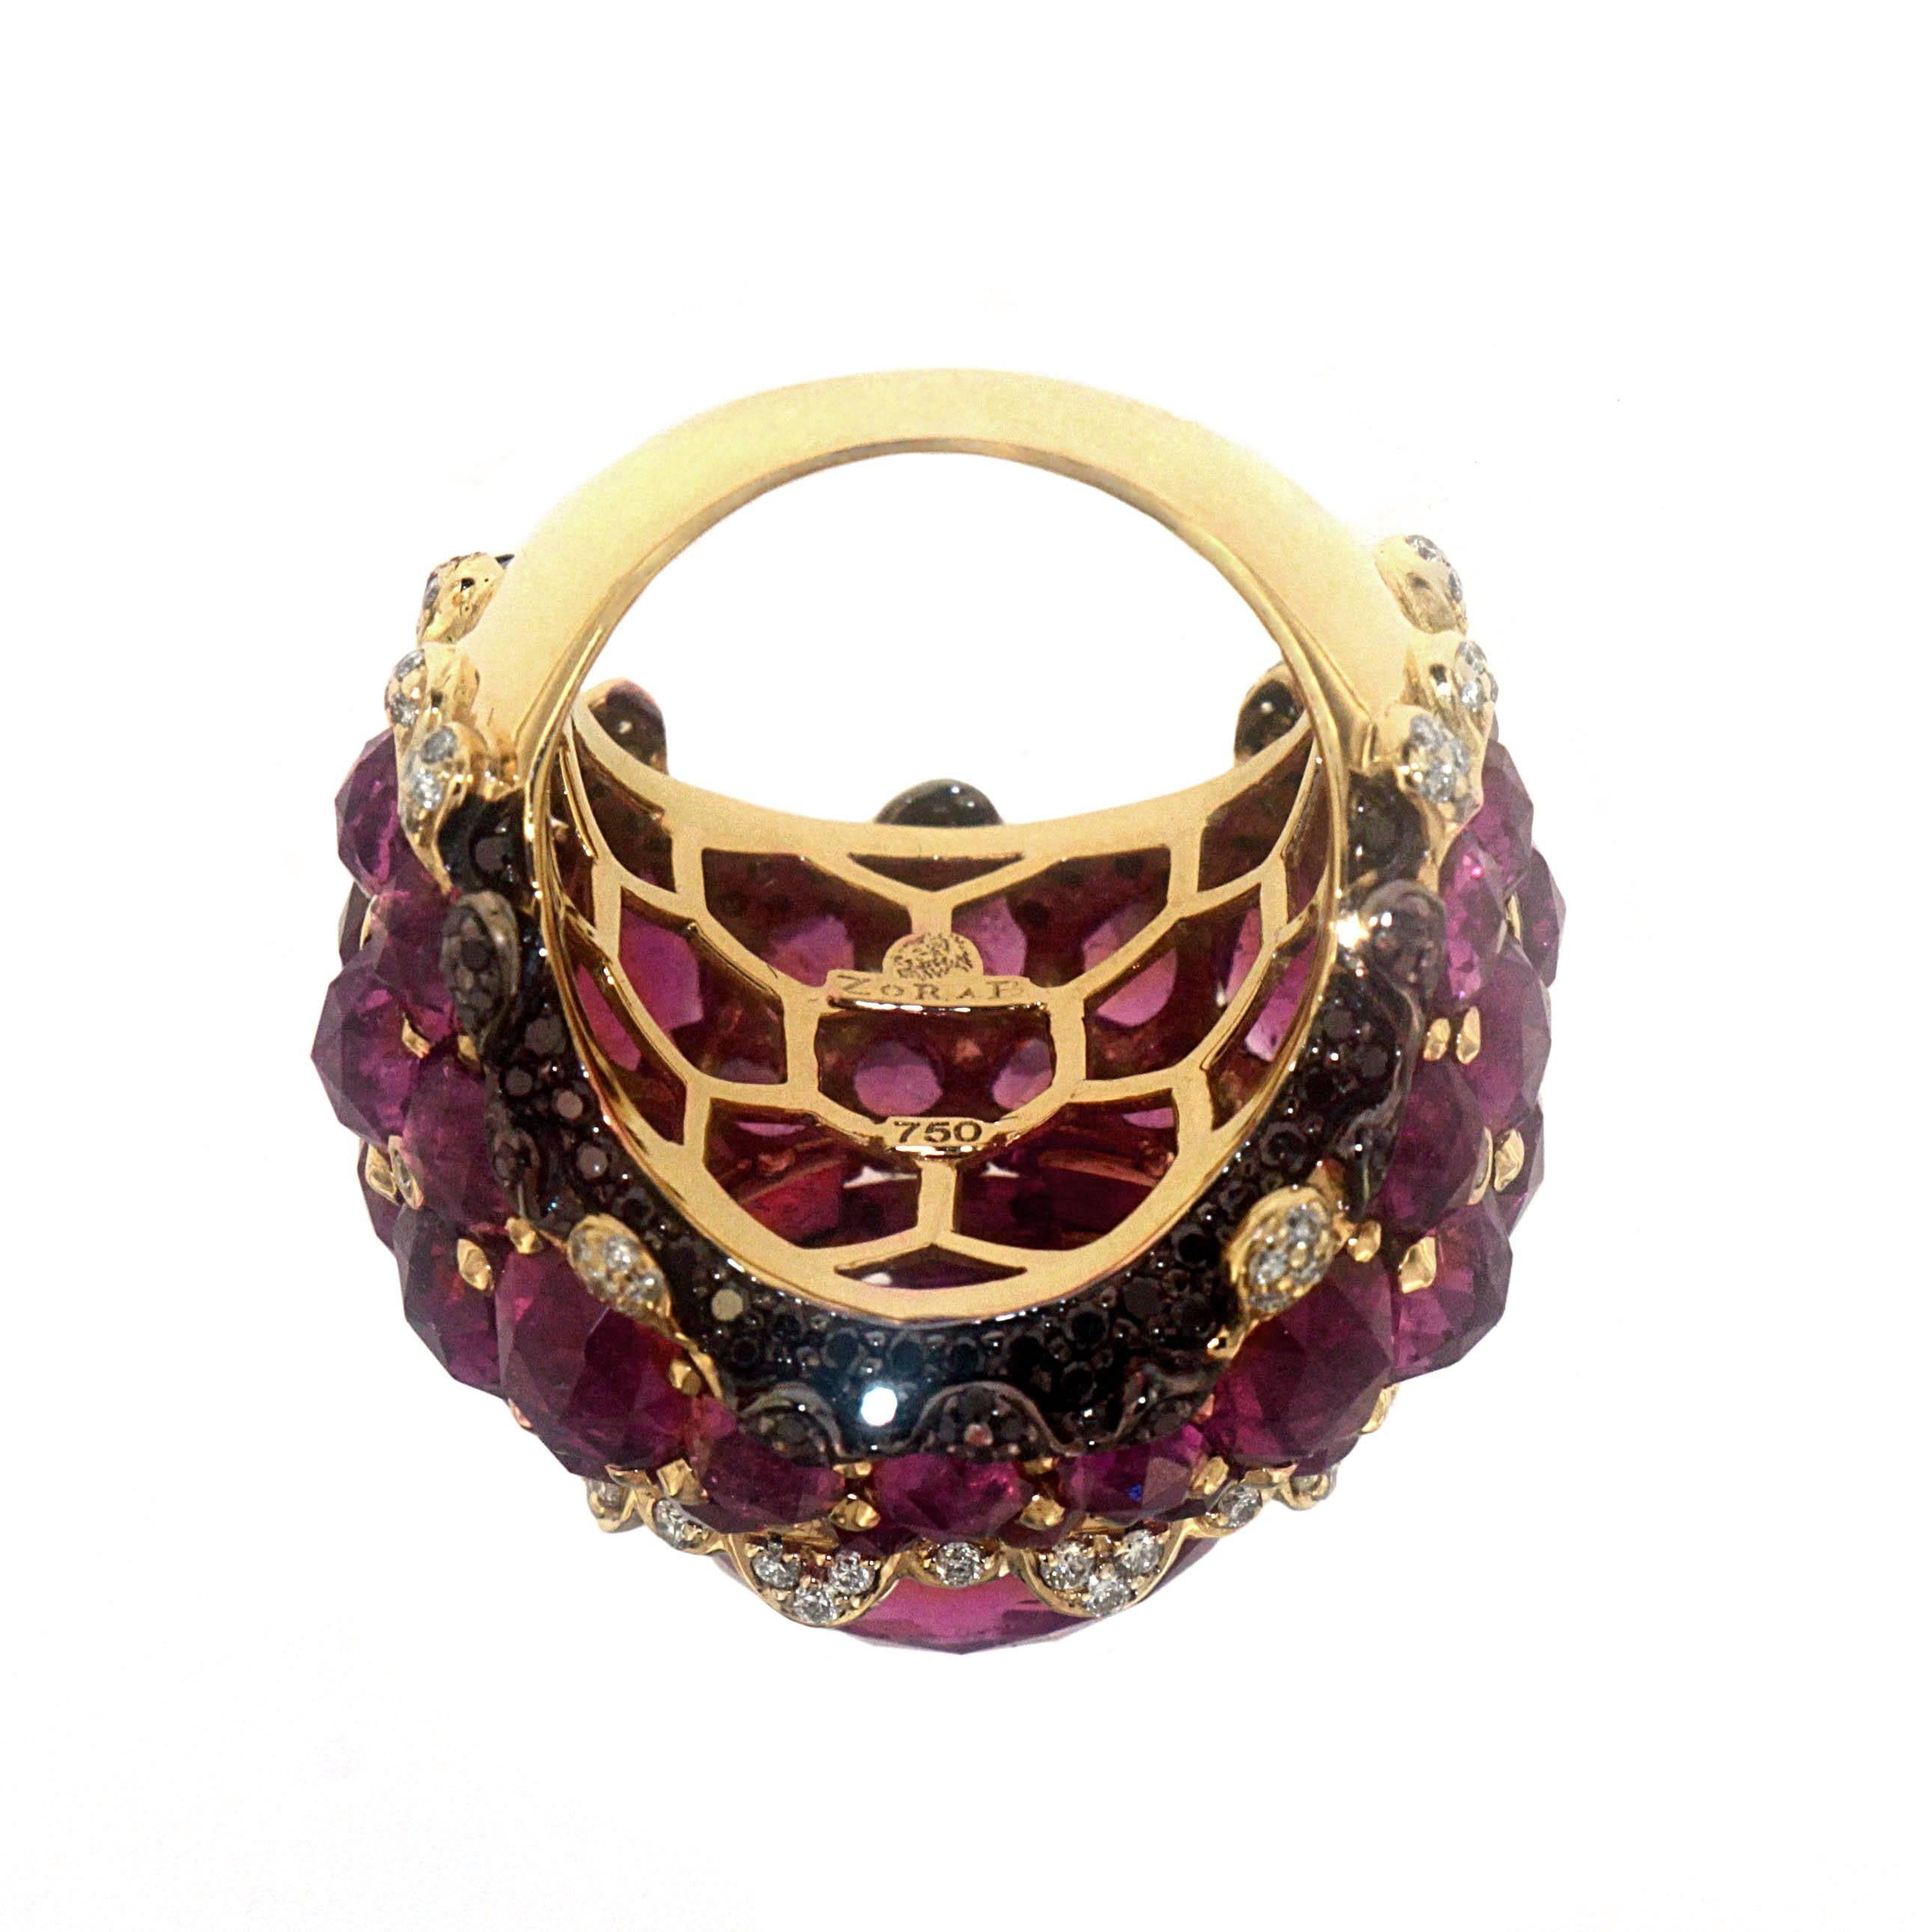 Contemporary Zorab Creation Raspberry Sorbet Rubelite Gold Cocktail Ring For Sale